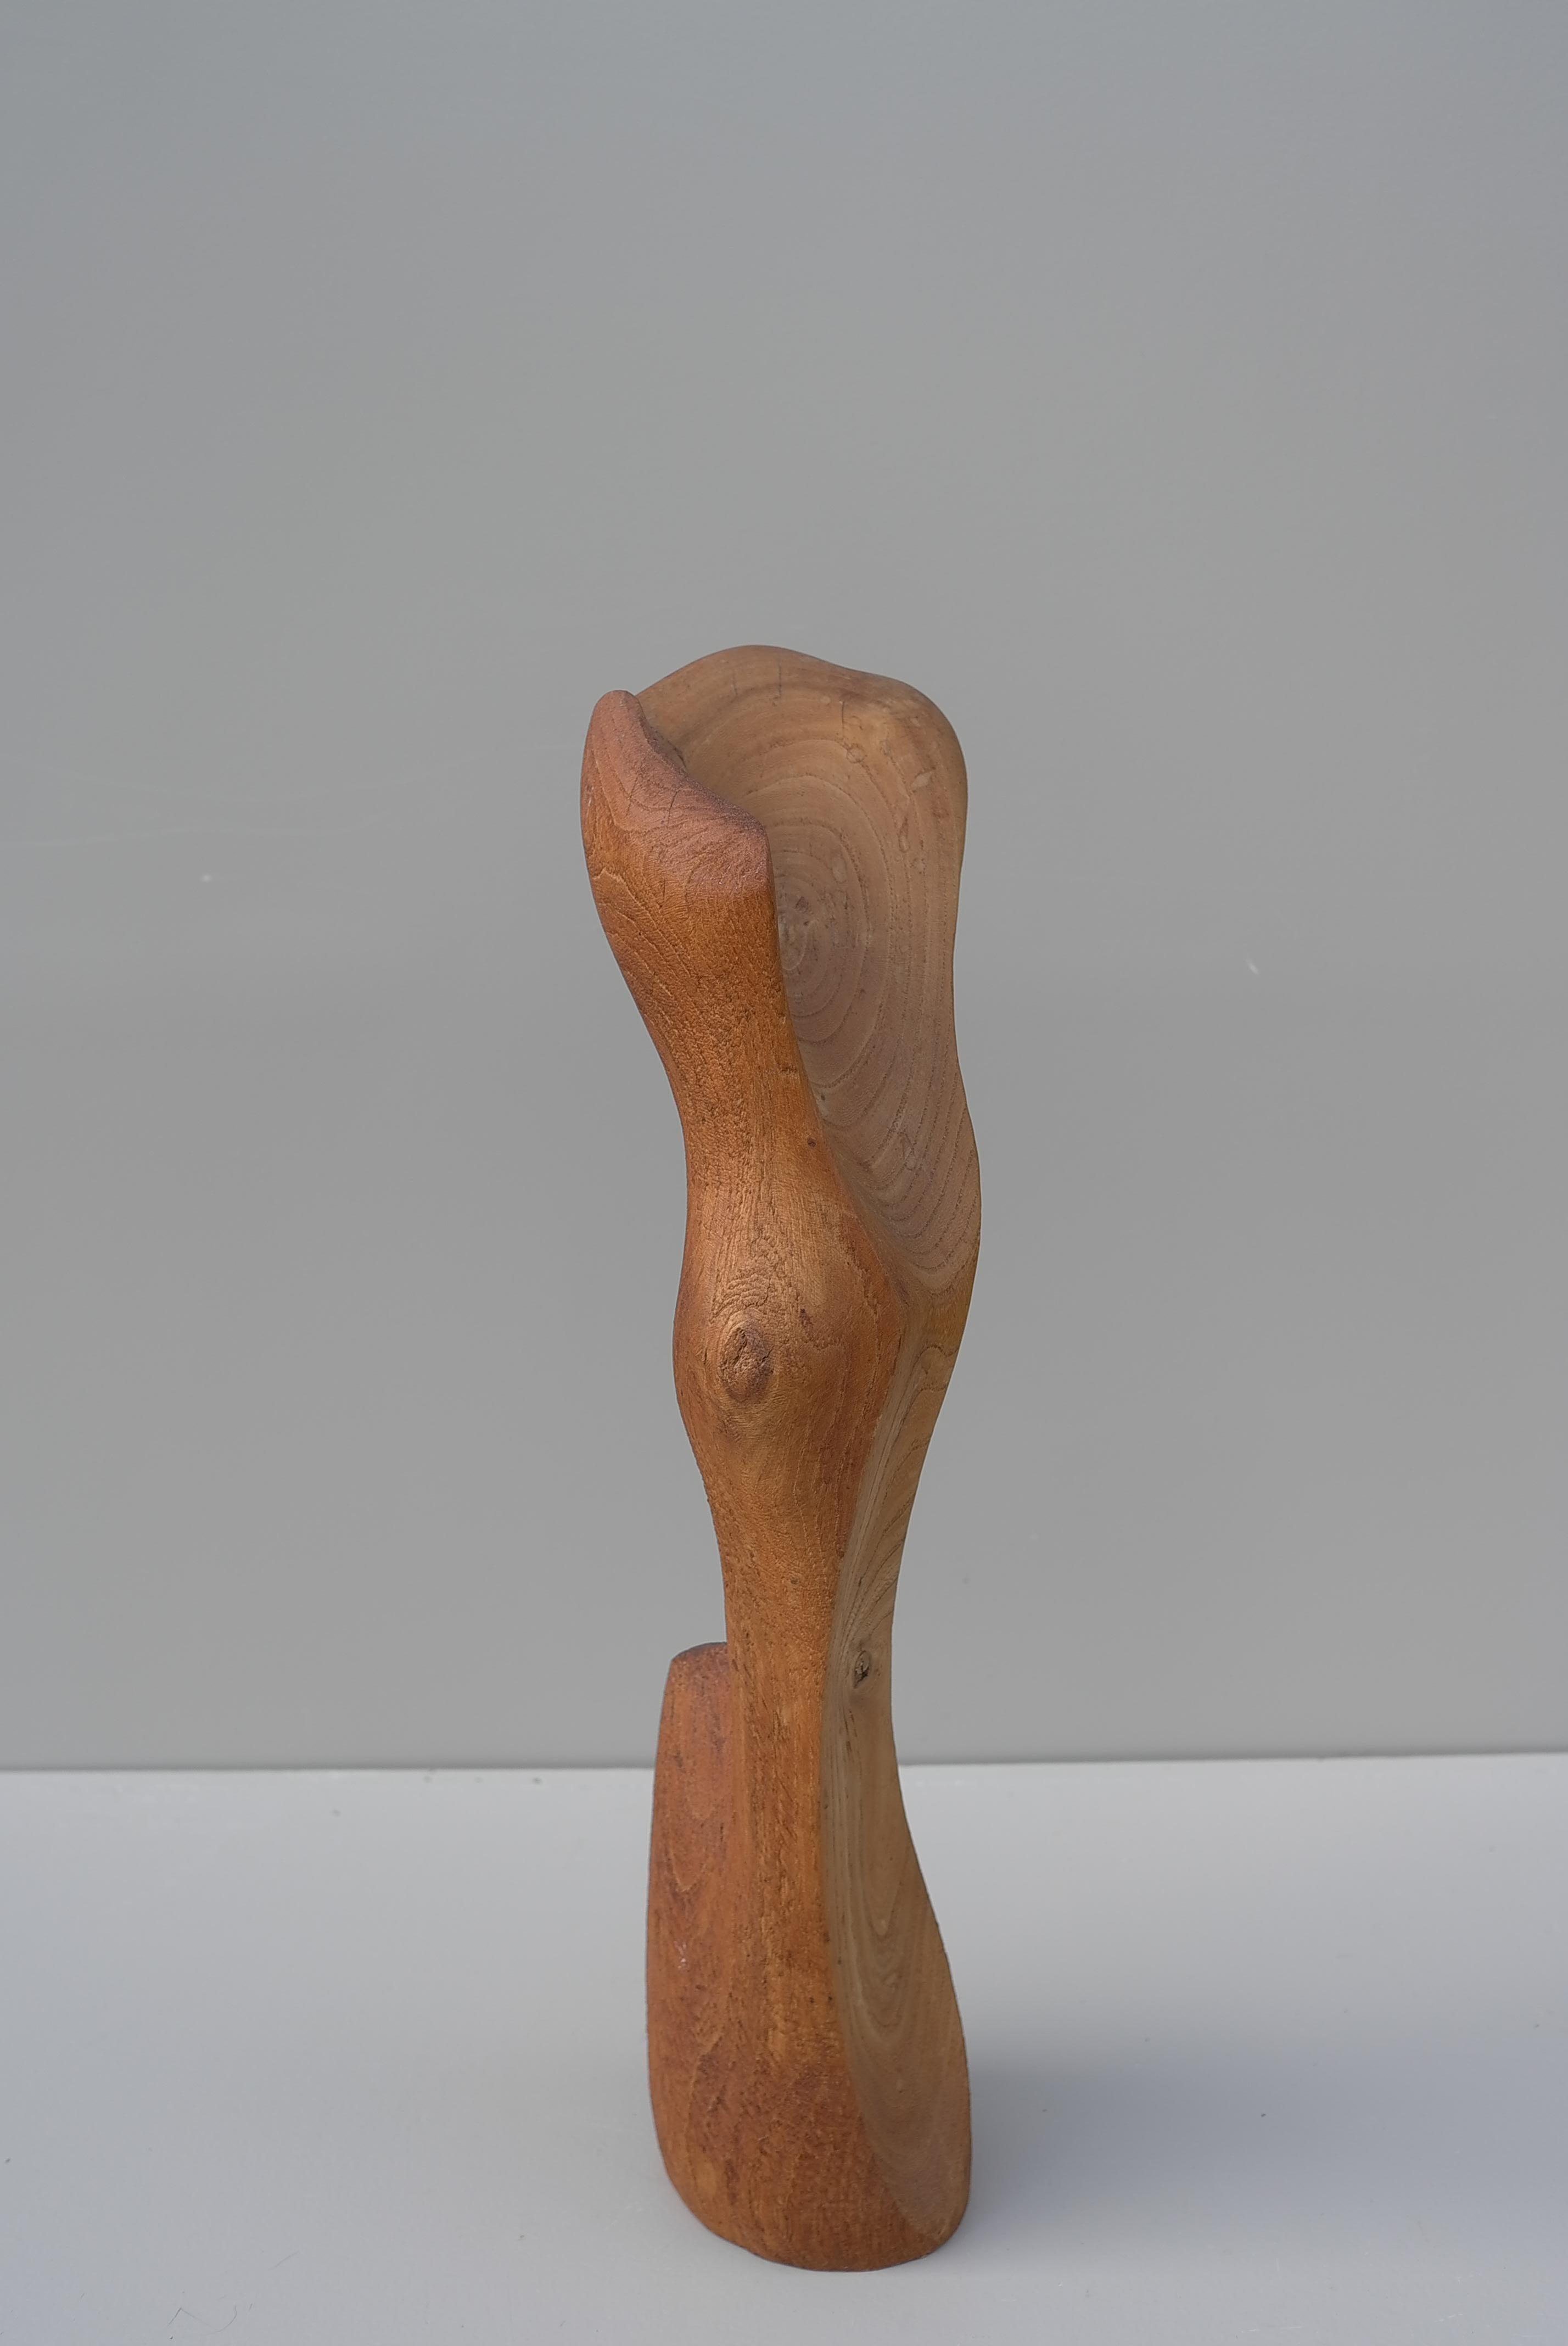  Abstract Mid-Century Modern Organic Wooden Sculpture, 1960's For Sale 3